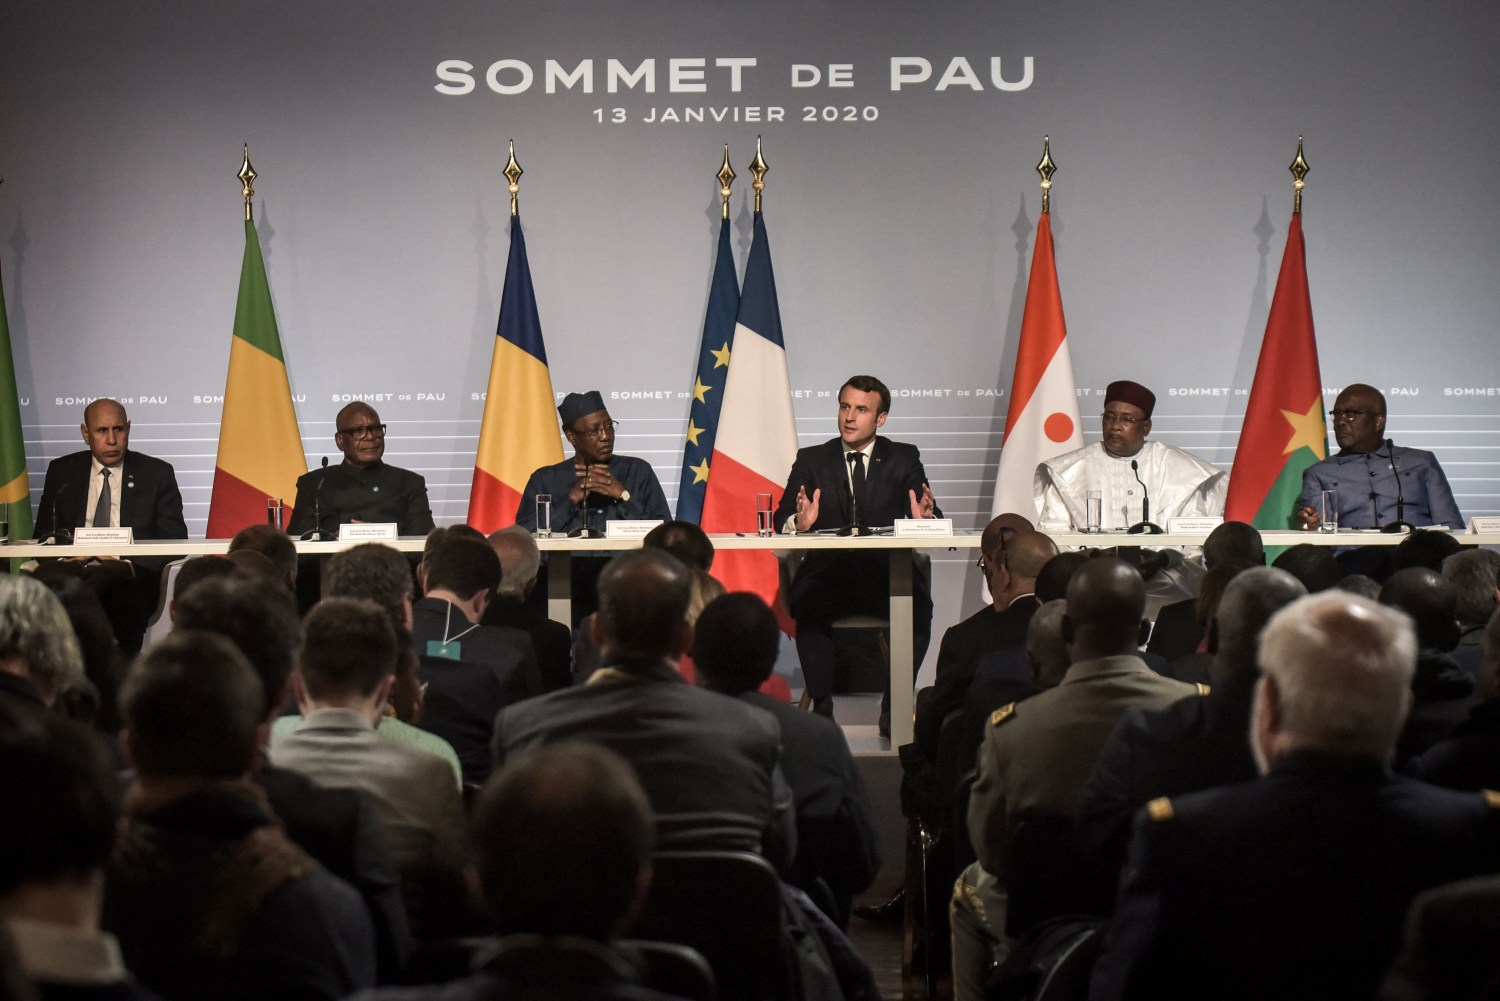 French President Emmanuel Macron (3-R), flanked by Mali's President Ibrahim Boubacar Keita (2-L), Burkina Faso's President Roch Marc Christian Kabore (R), Niger President Mahamadou Issoufou (2-R), Mauritania's President Mohamed Ould Cheikh El Ghazouani (L) and Chad's President Idriss Deby (3-R), speaks during a press conference as part of the G5 Sahel summit on the situation in the Sahel region at the Chateau de Pau in Pau, France, January 13, 2020. Photo by Quentin Top/Pool/ABACAPRESS.COM